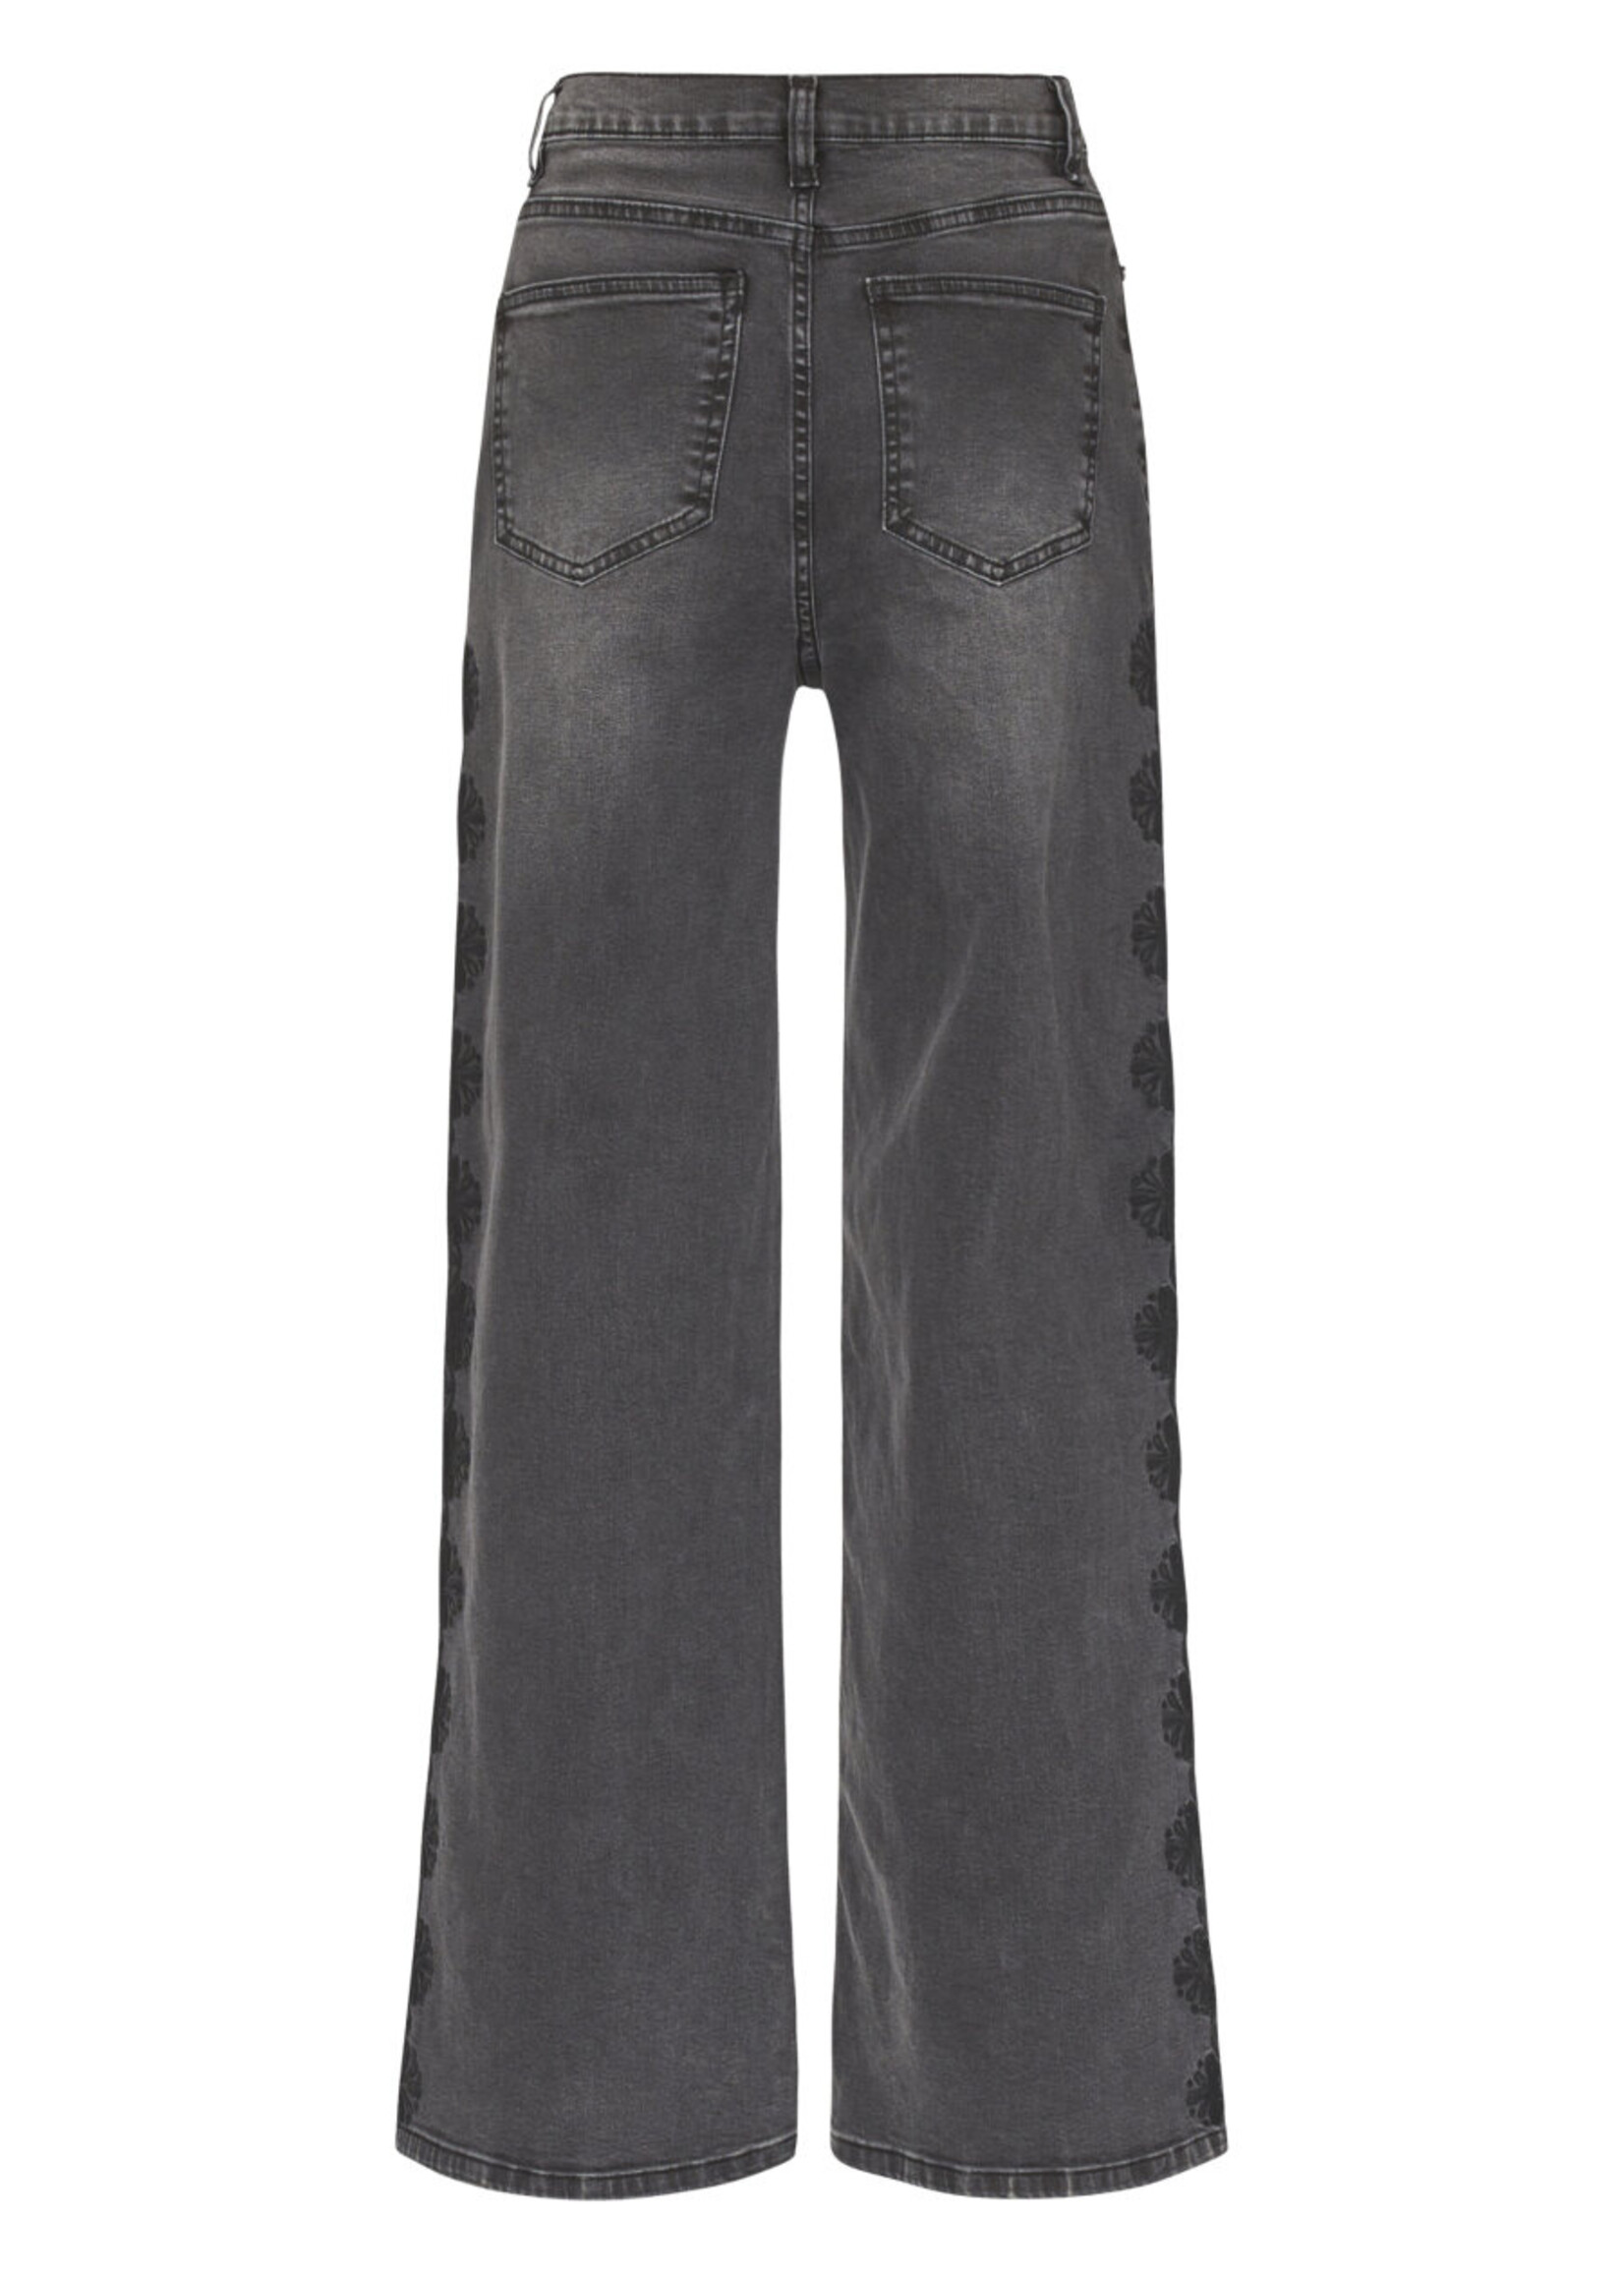 SISTERS POINT OWI jeans | grey wash/black